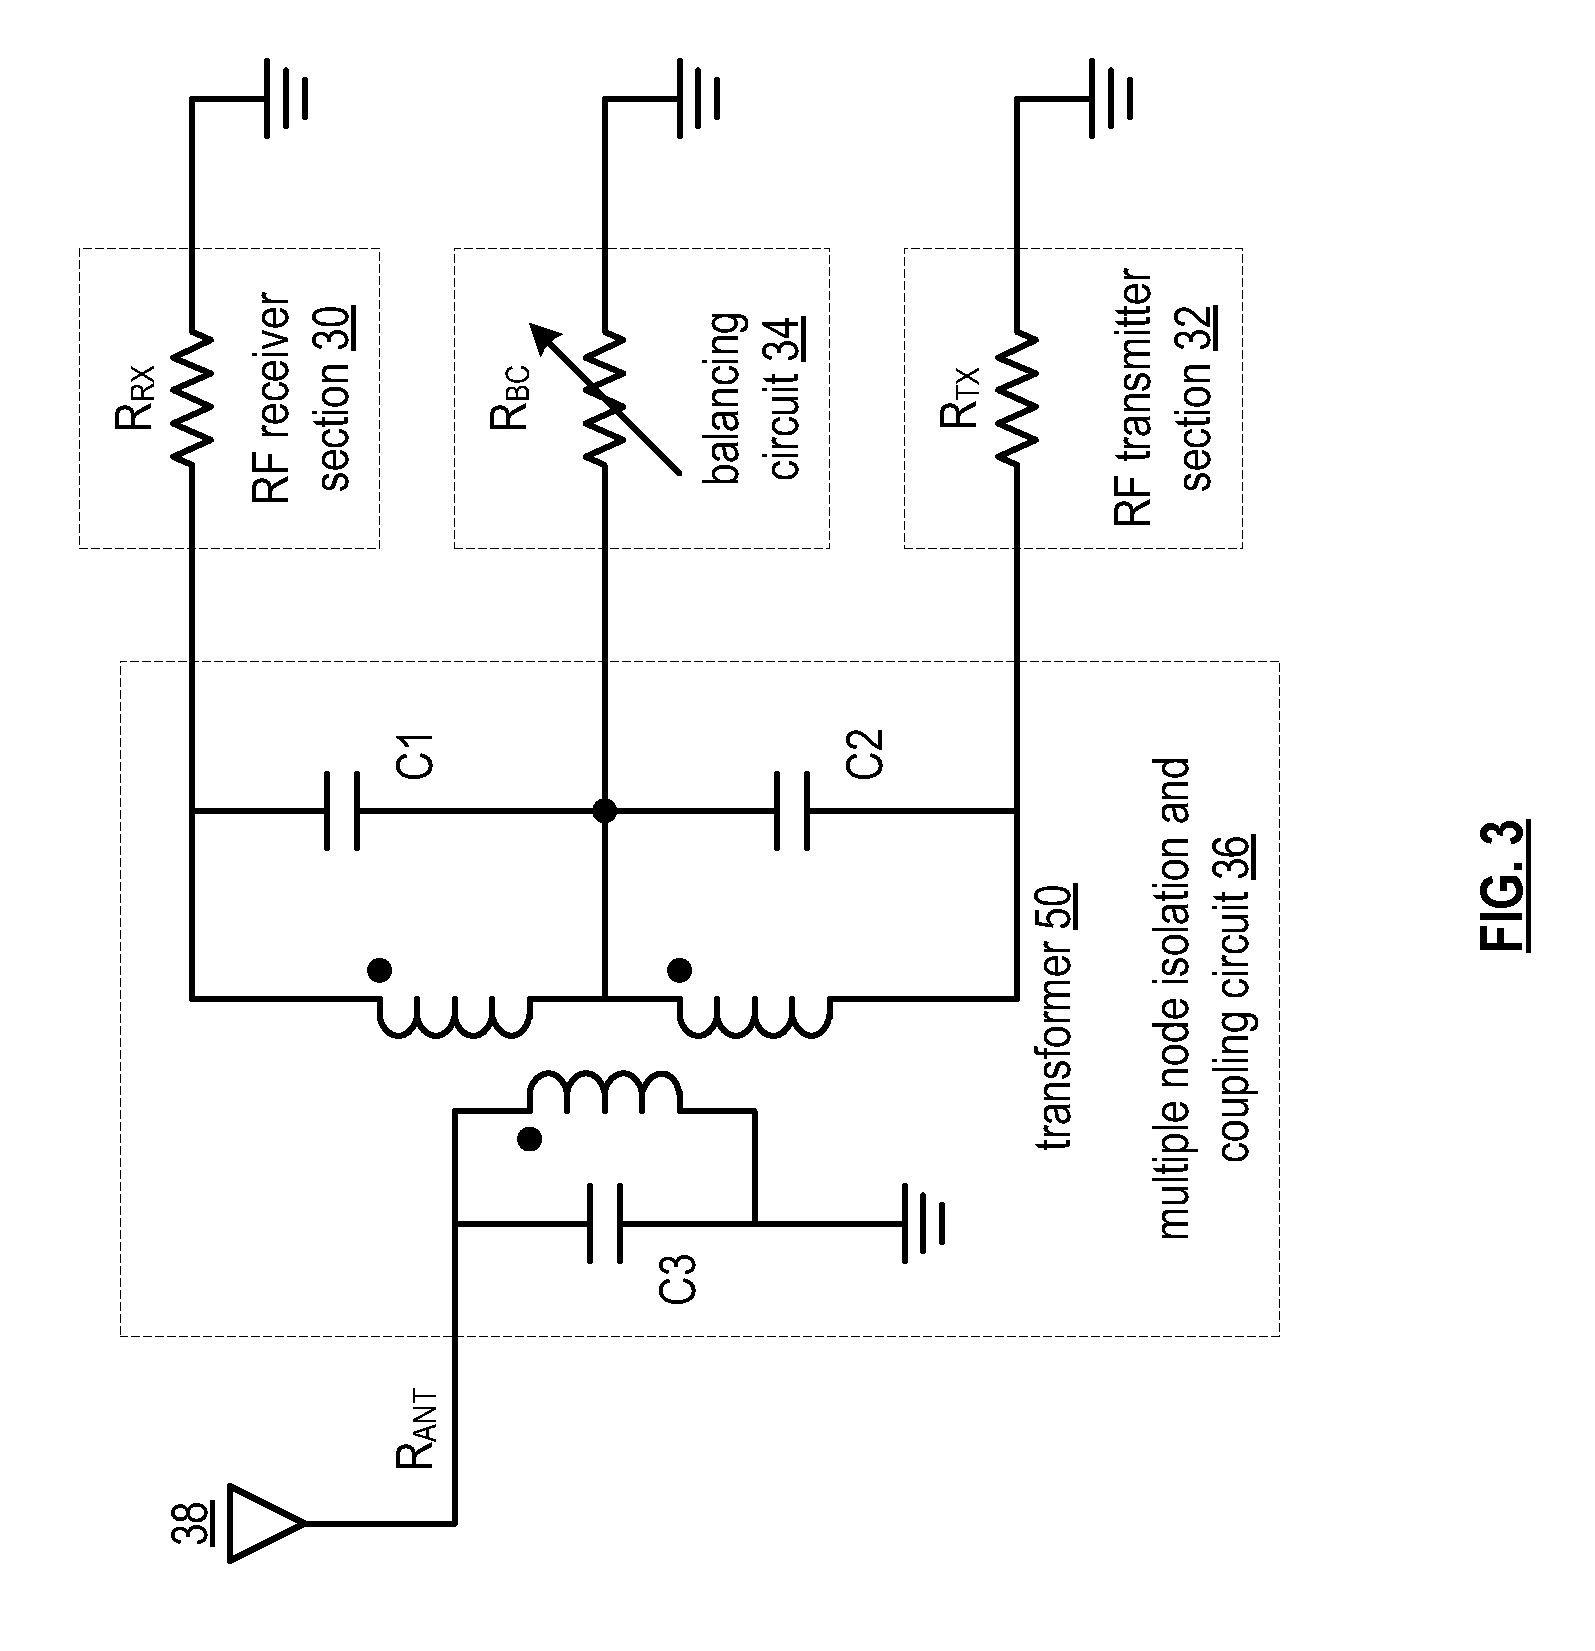 RF transceiver front-end with rx/tx isolation